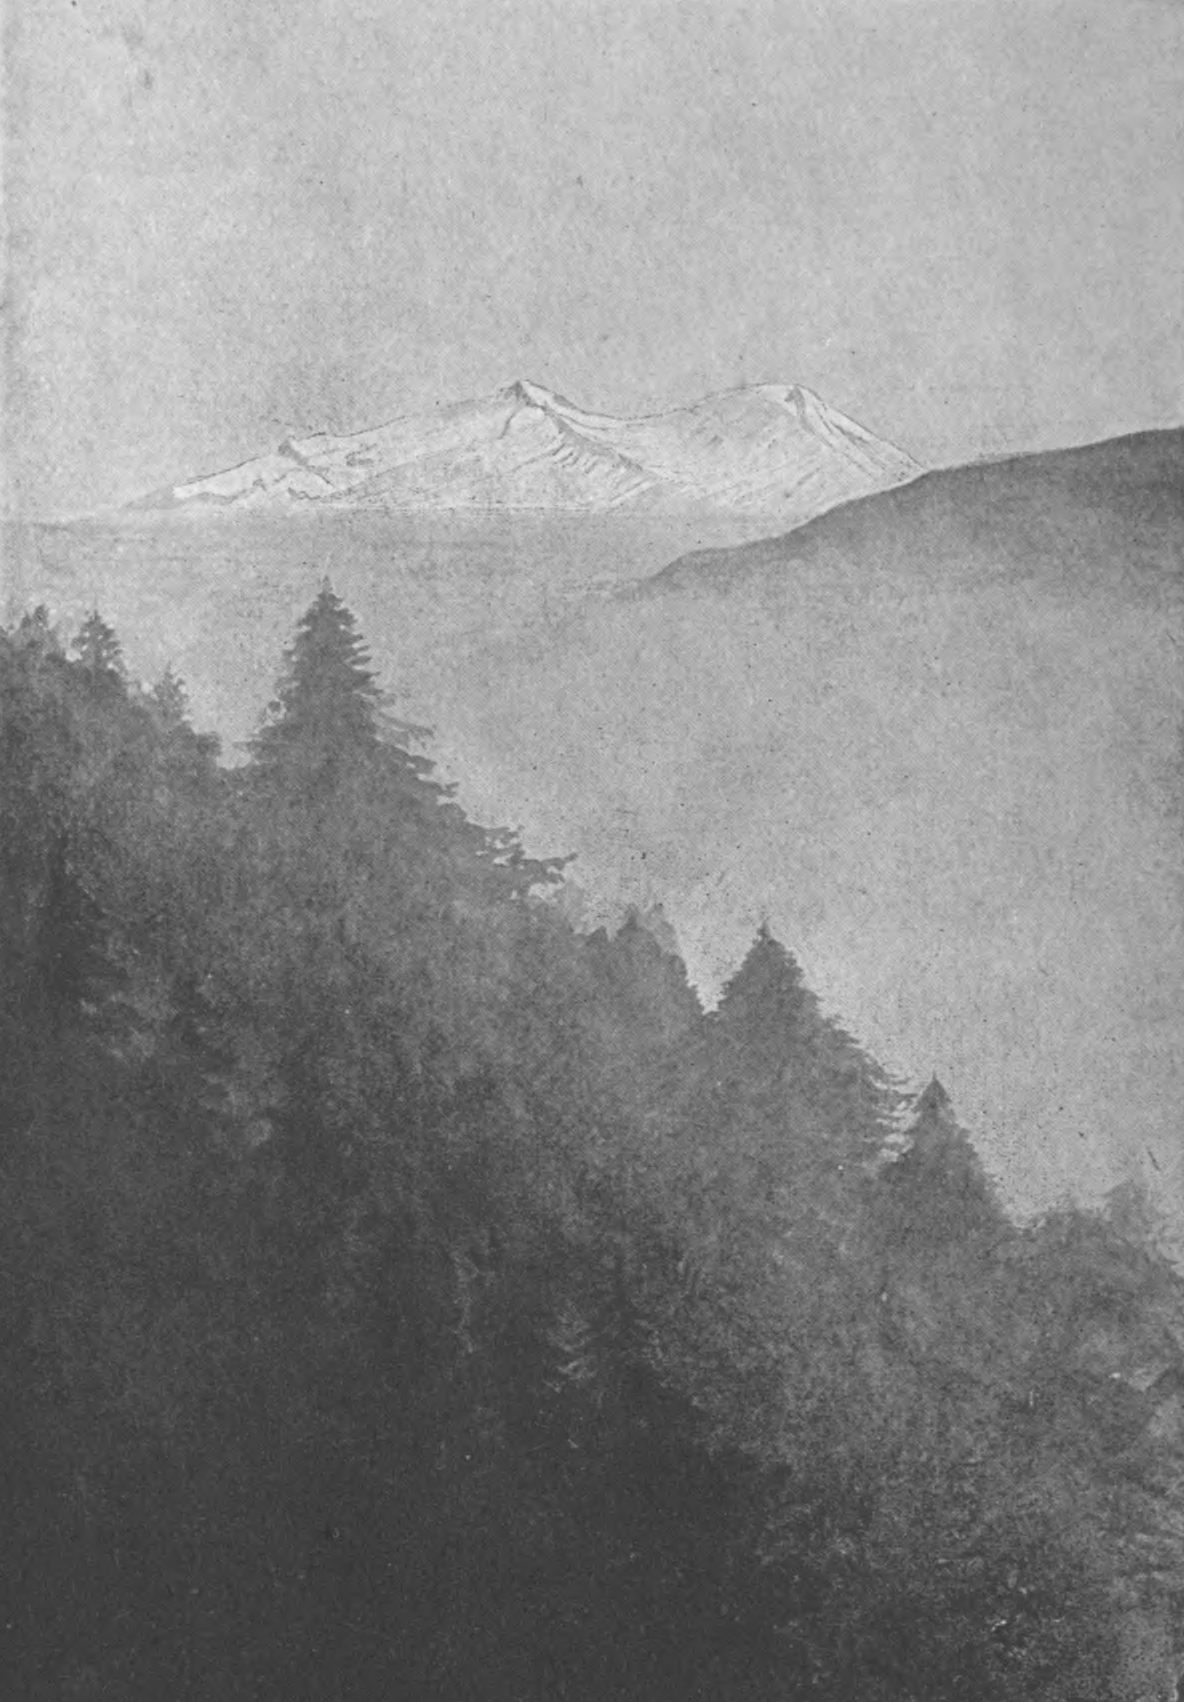 Sketch of a view from the top of a mountain, overlooking a forest. Tall white mountains rise in the distance from a plain.